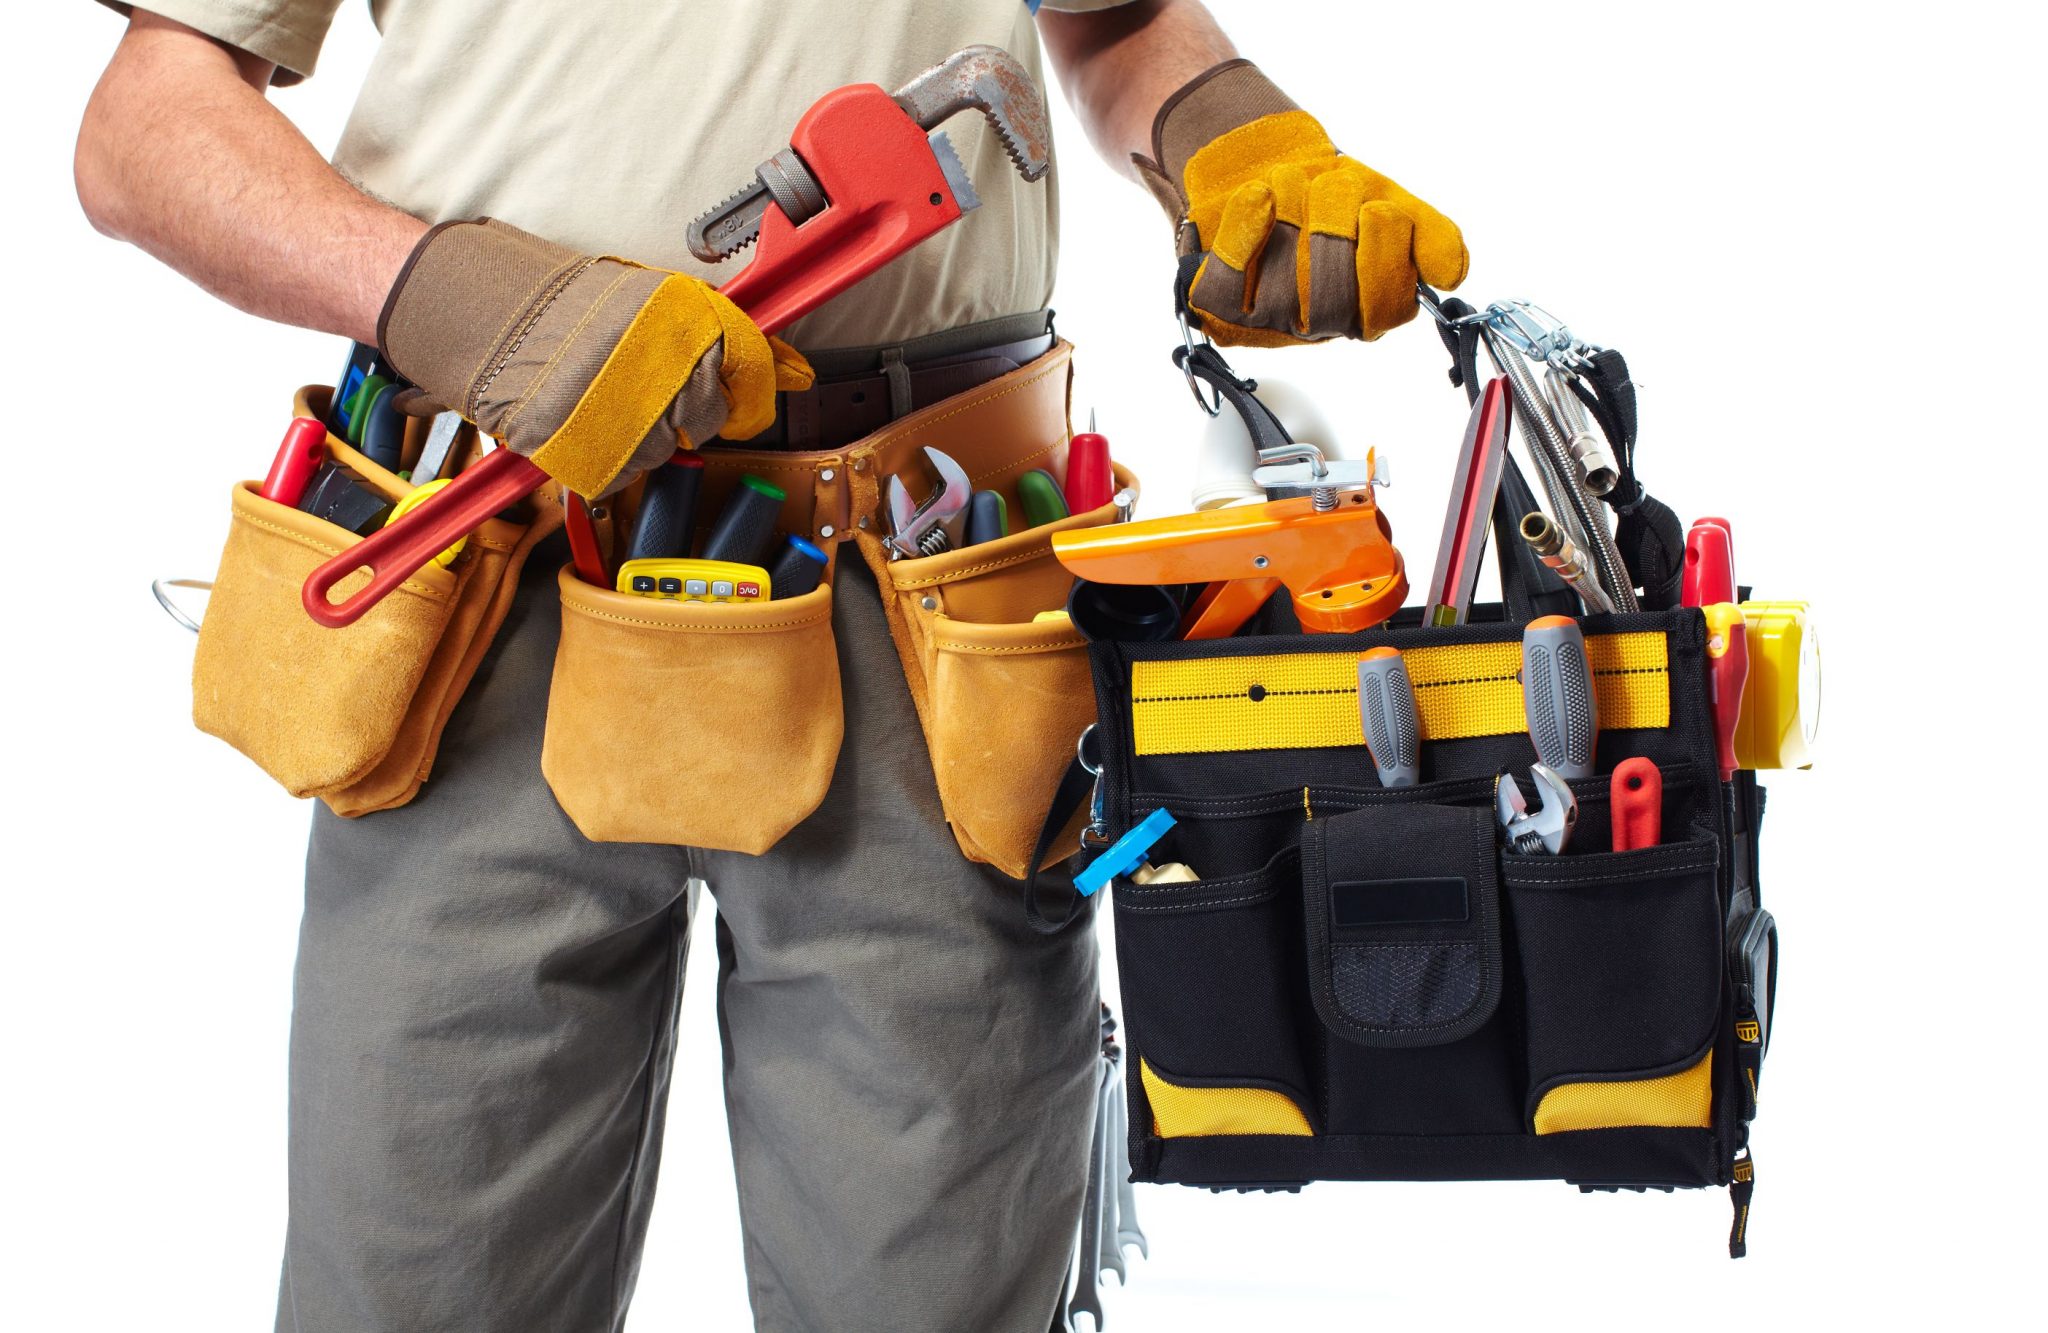 Handyman Service and Cost in Omaha |Handyman Services Of Omaha